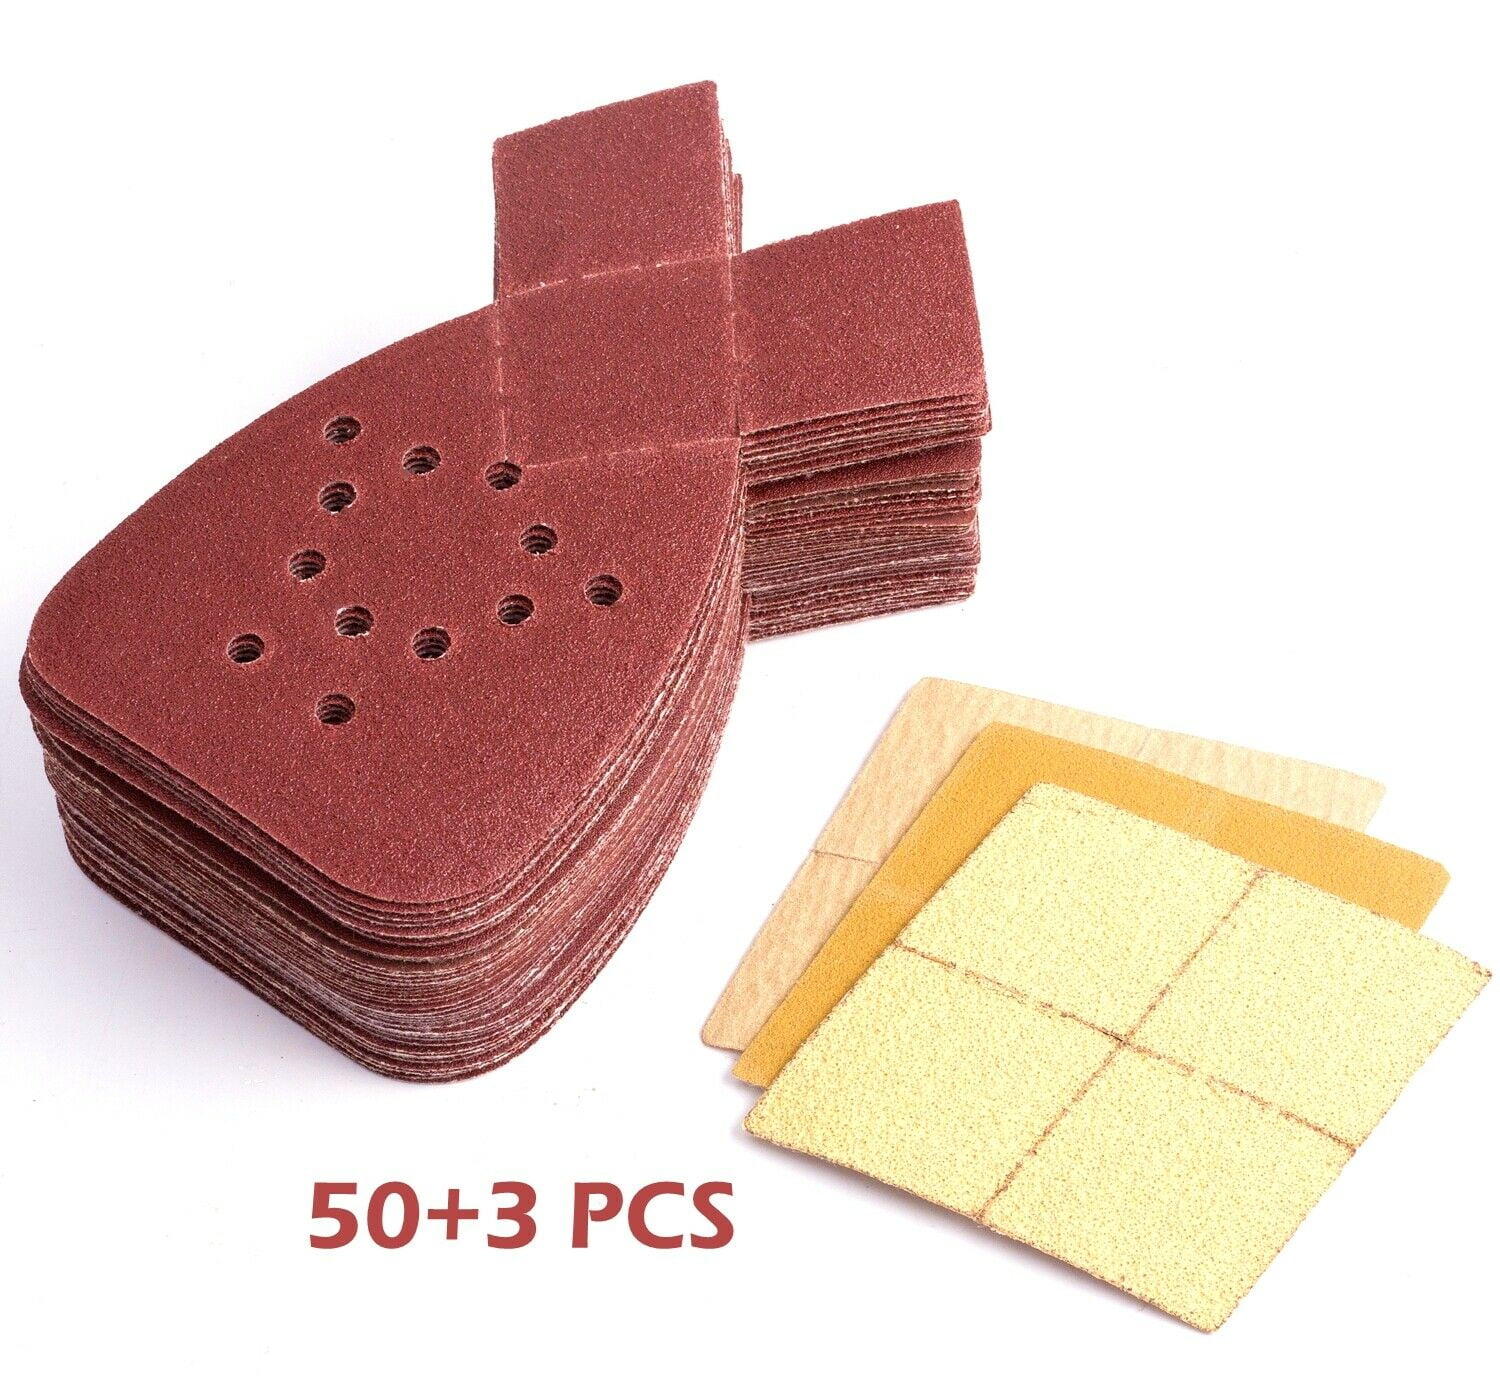 60 Grit Sanding Pads For Black And Decker Mouse Sanders, 12 Holes